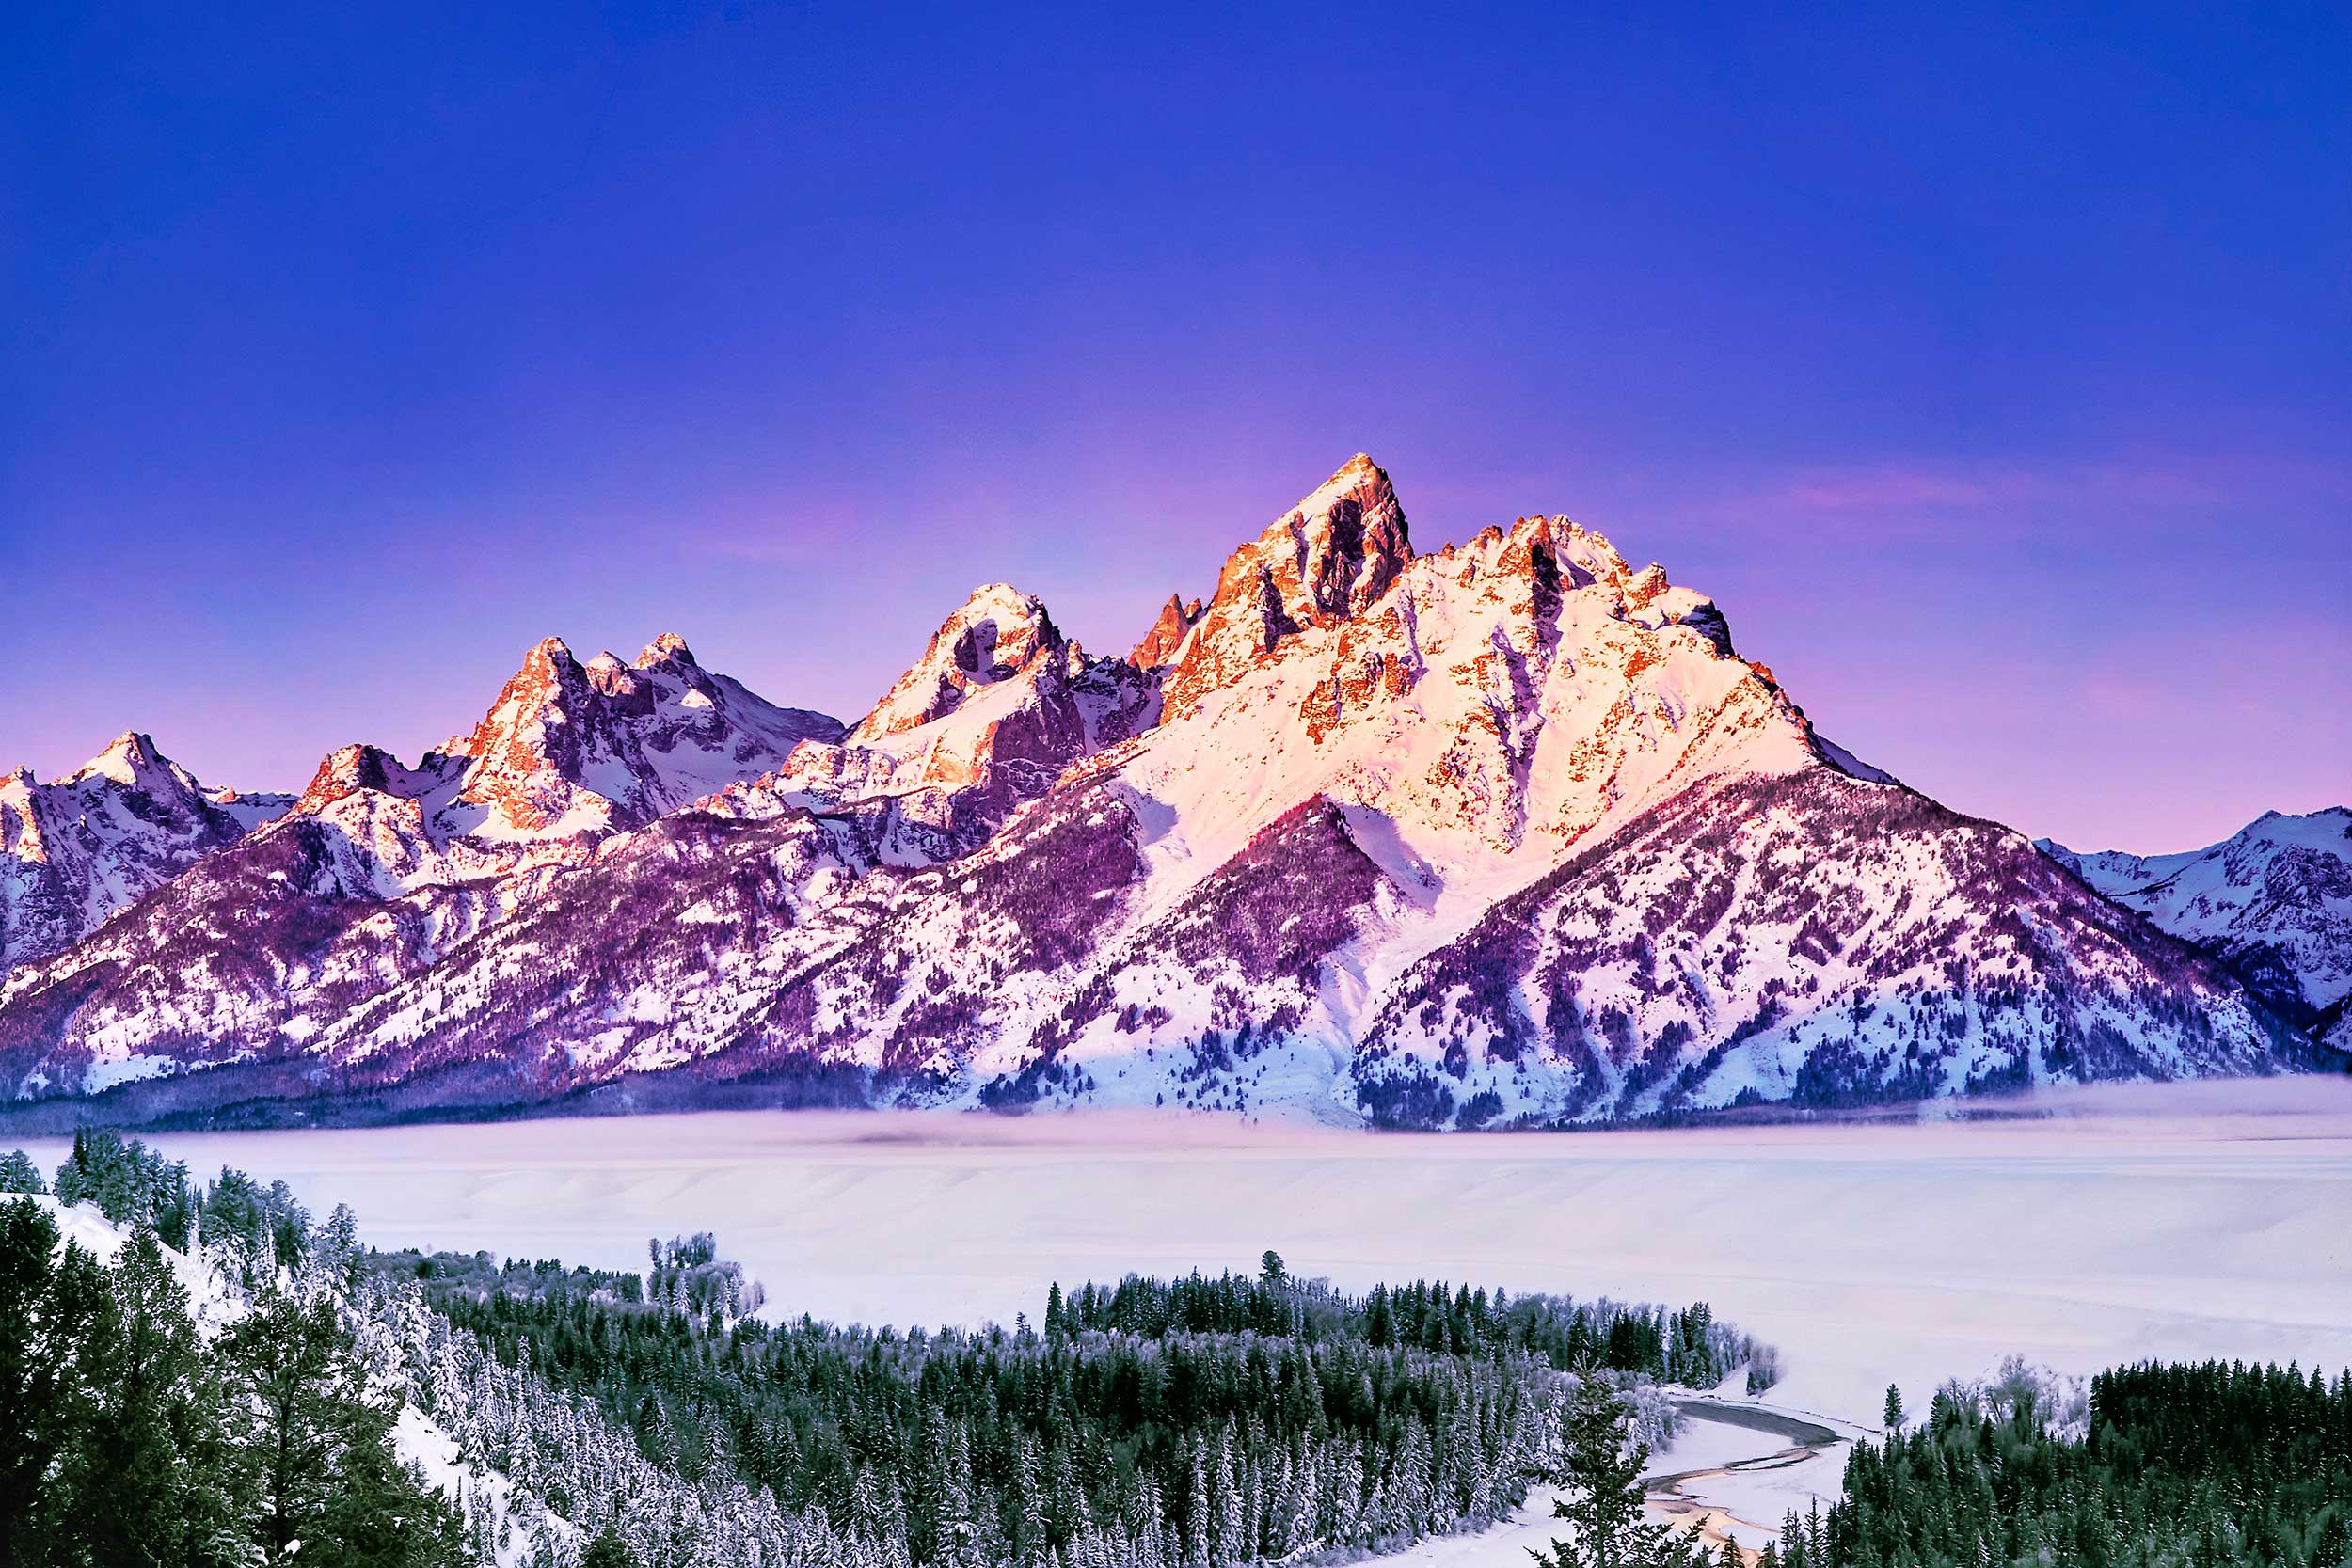 The Winter Guide to Grand Teton National Park